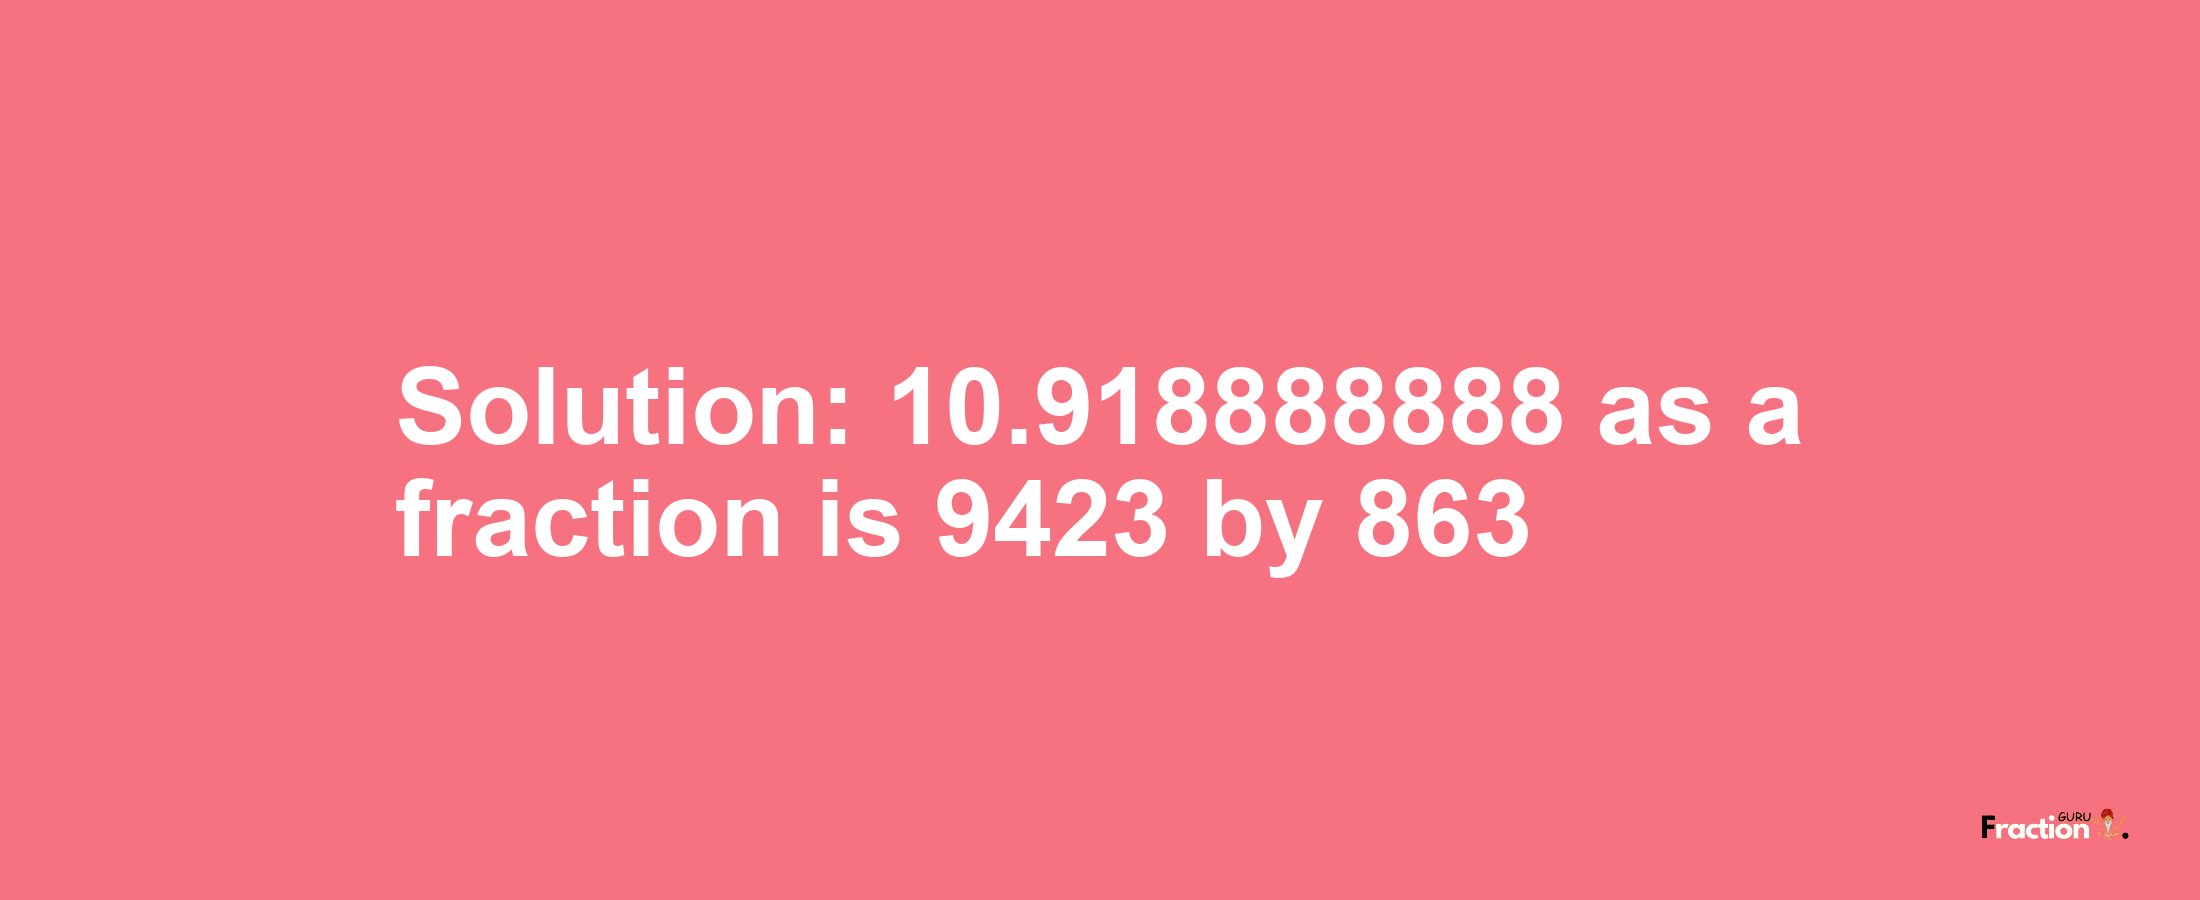 Solution:10.918888888 as a fraction is 9423/863